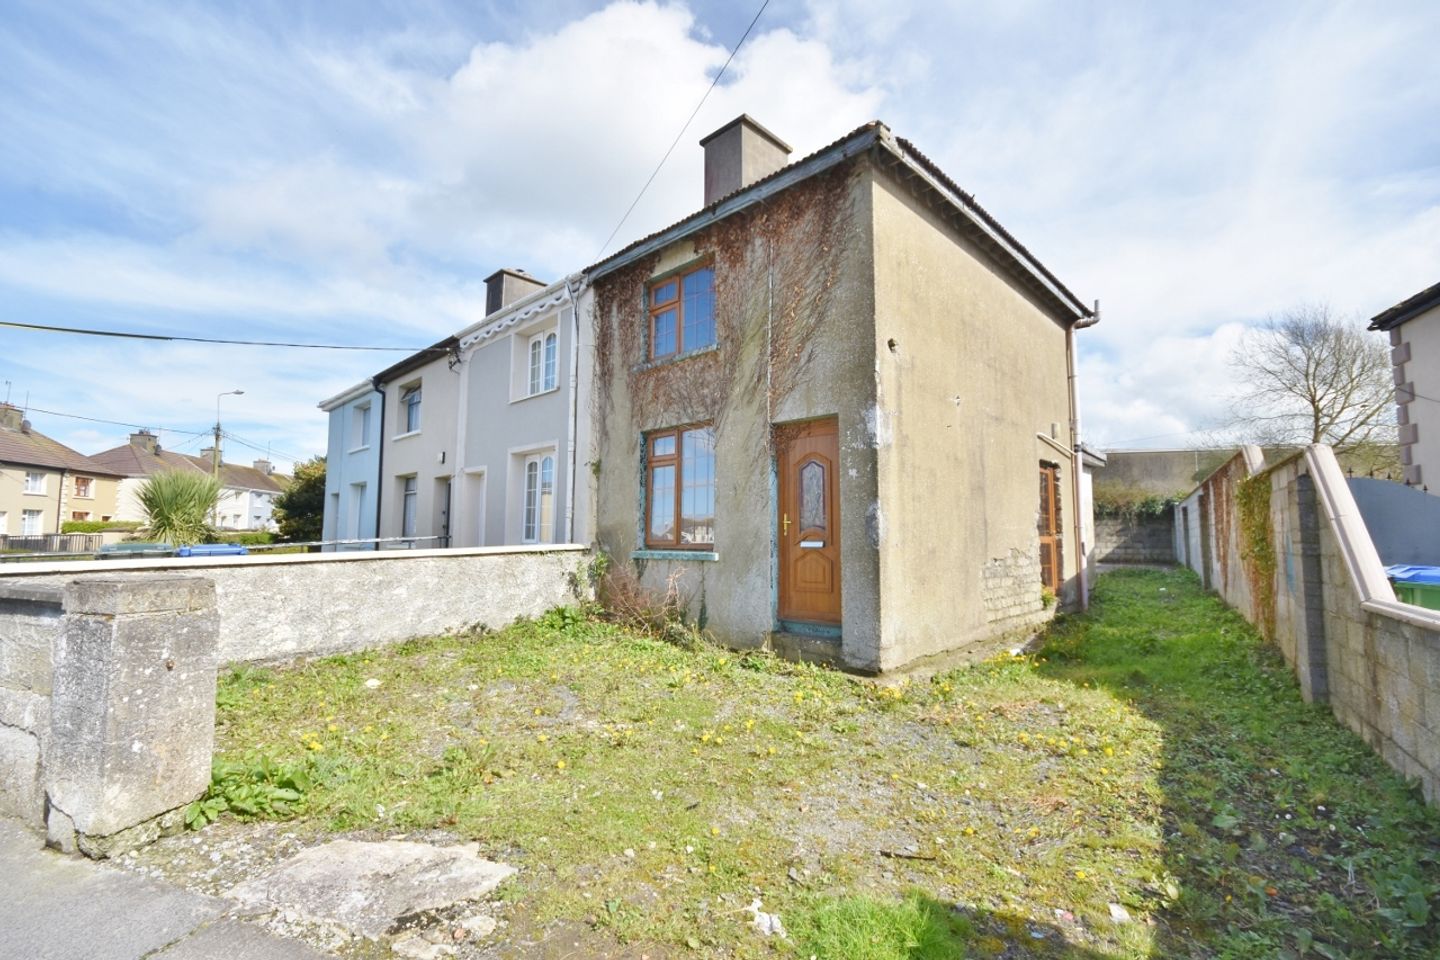 5 O Connell's Avenue, Listowel, Co. Kerry, V31XR91